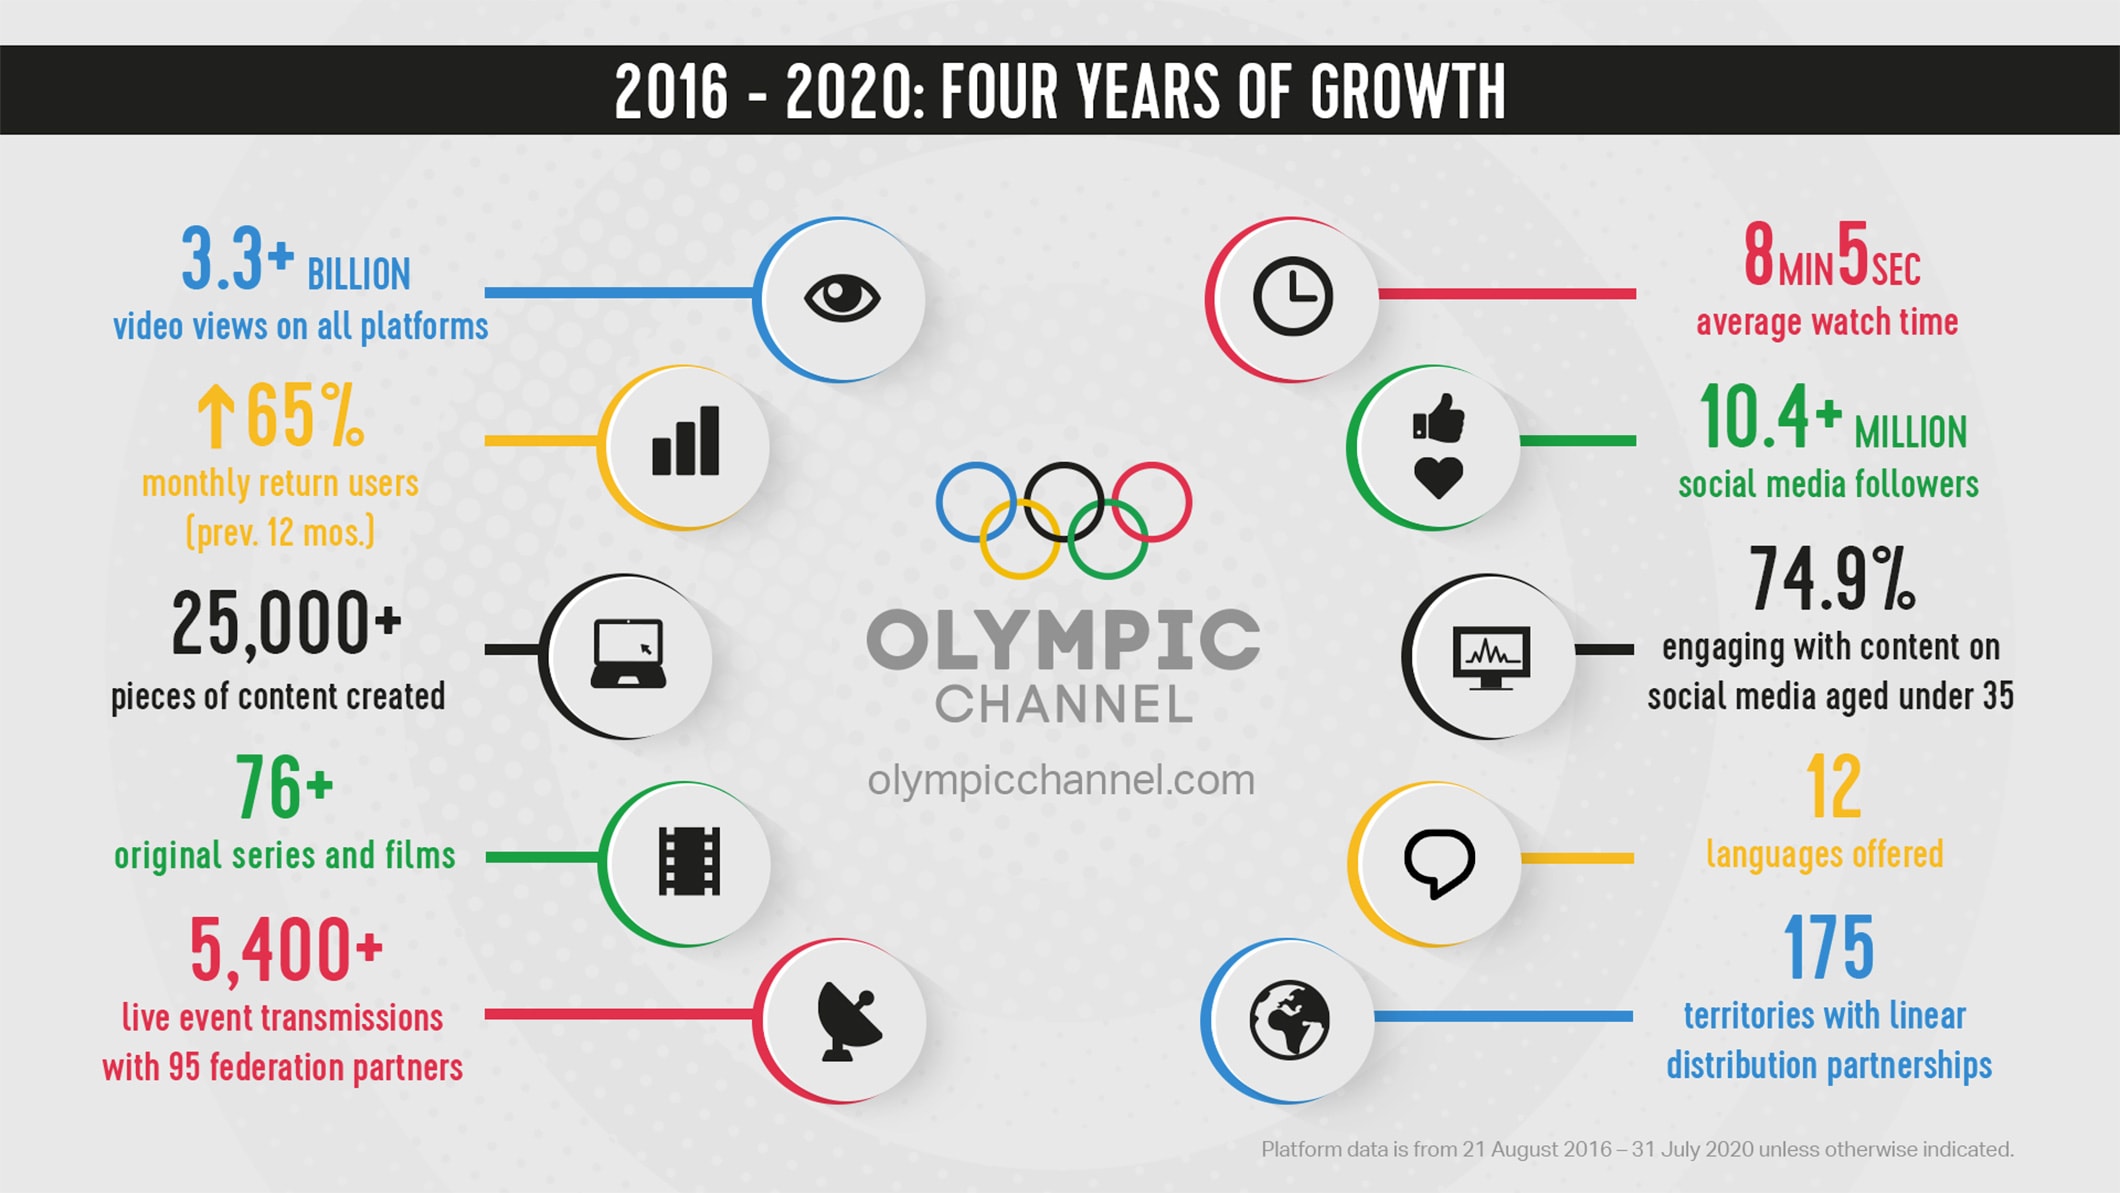 Olympic Channel celebrates fouryear anniversary with record growth